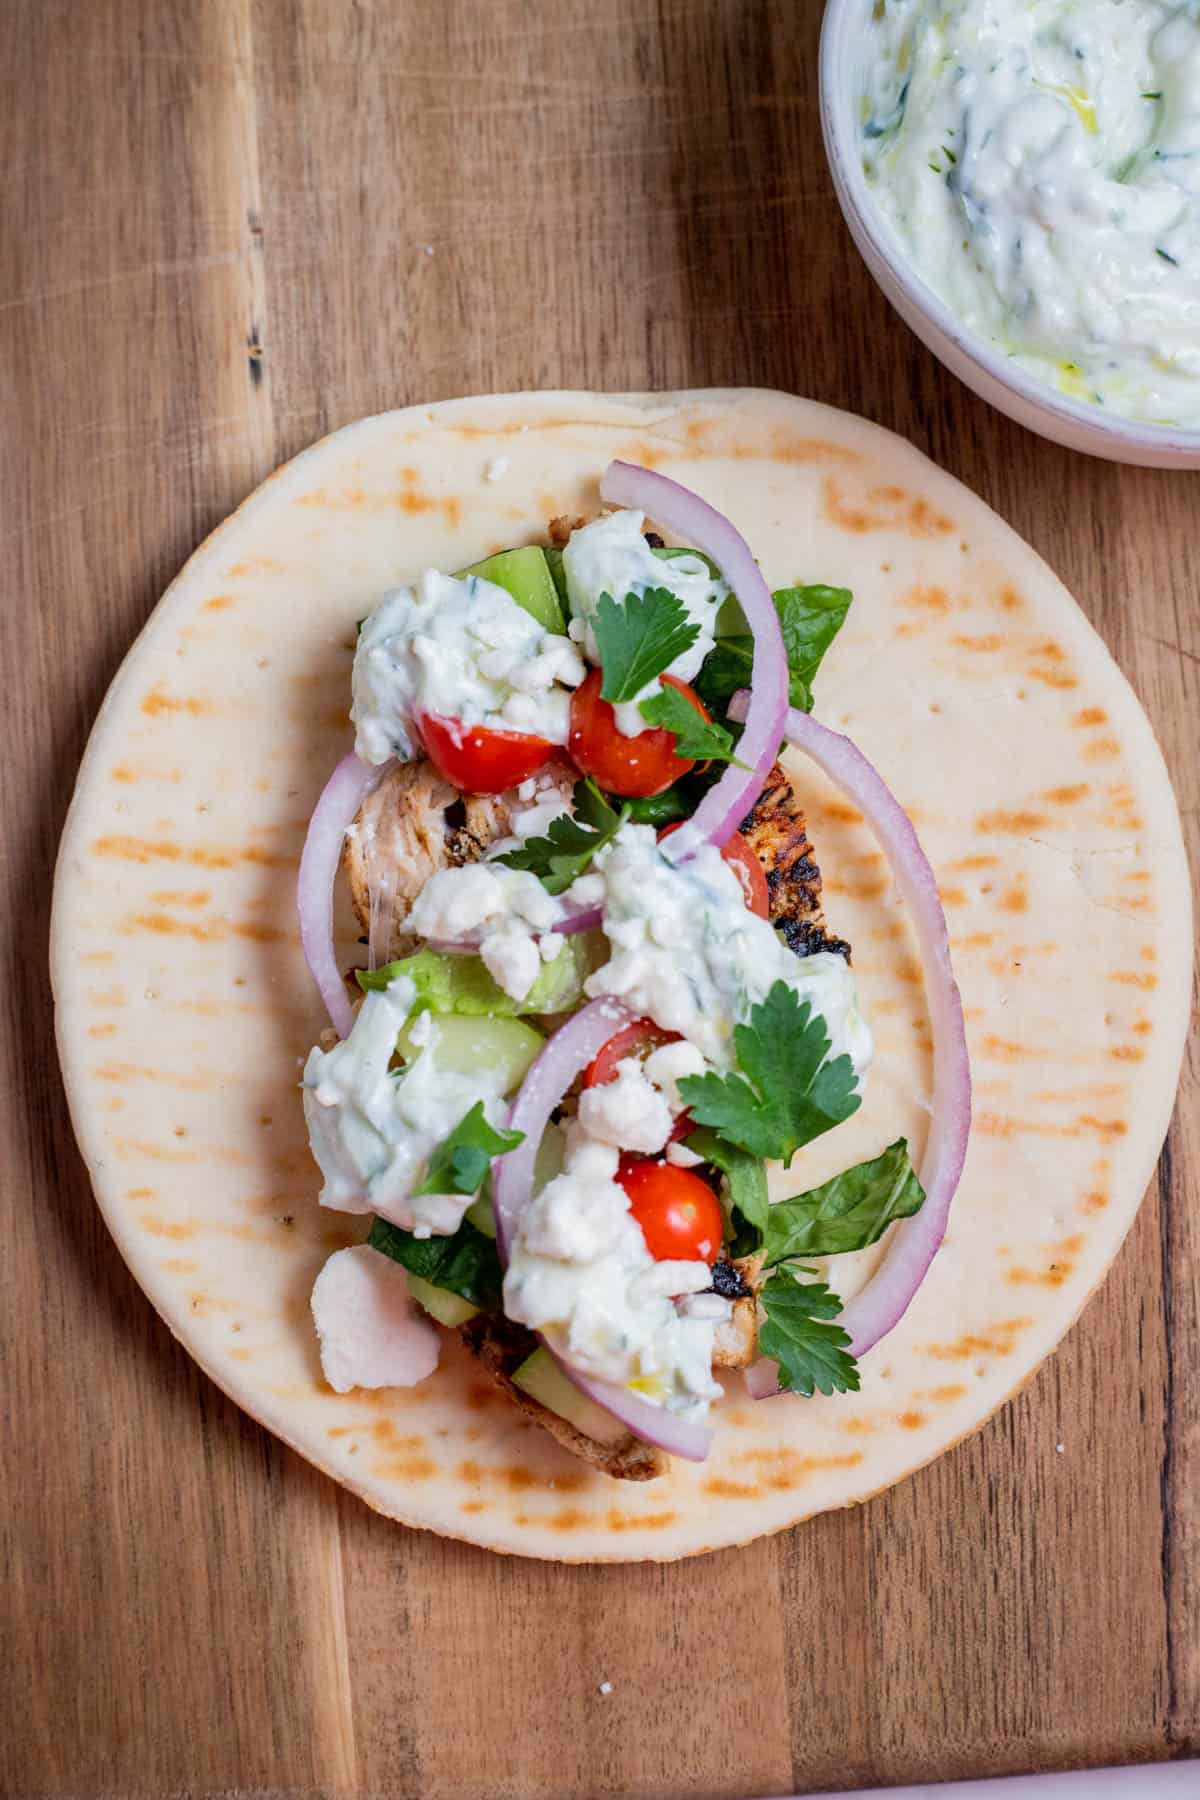 Pita bread with gyro ingredients on top.